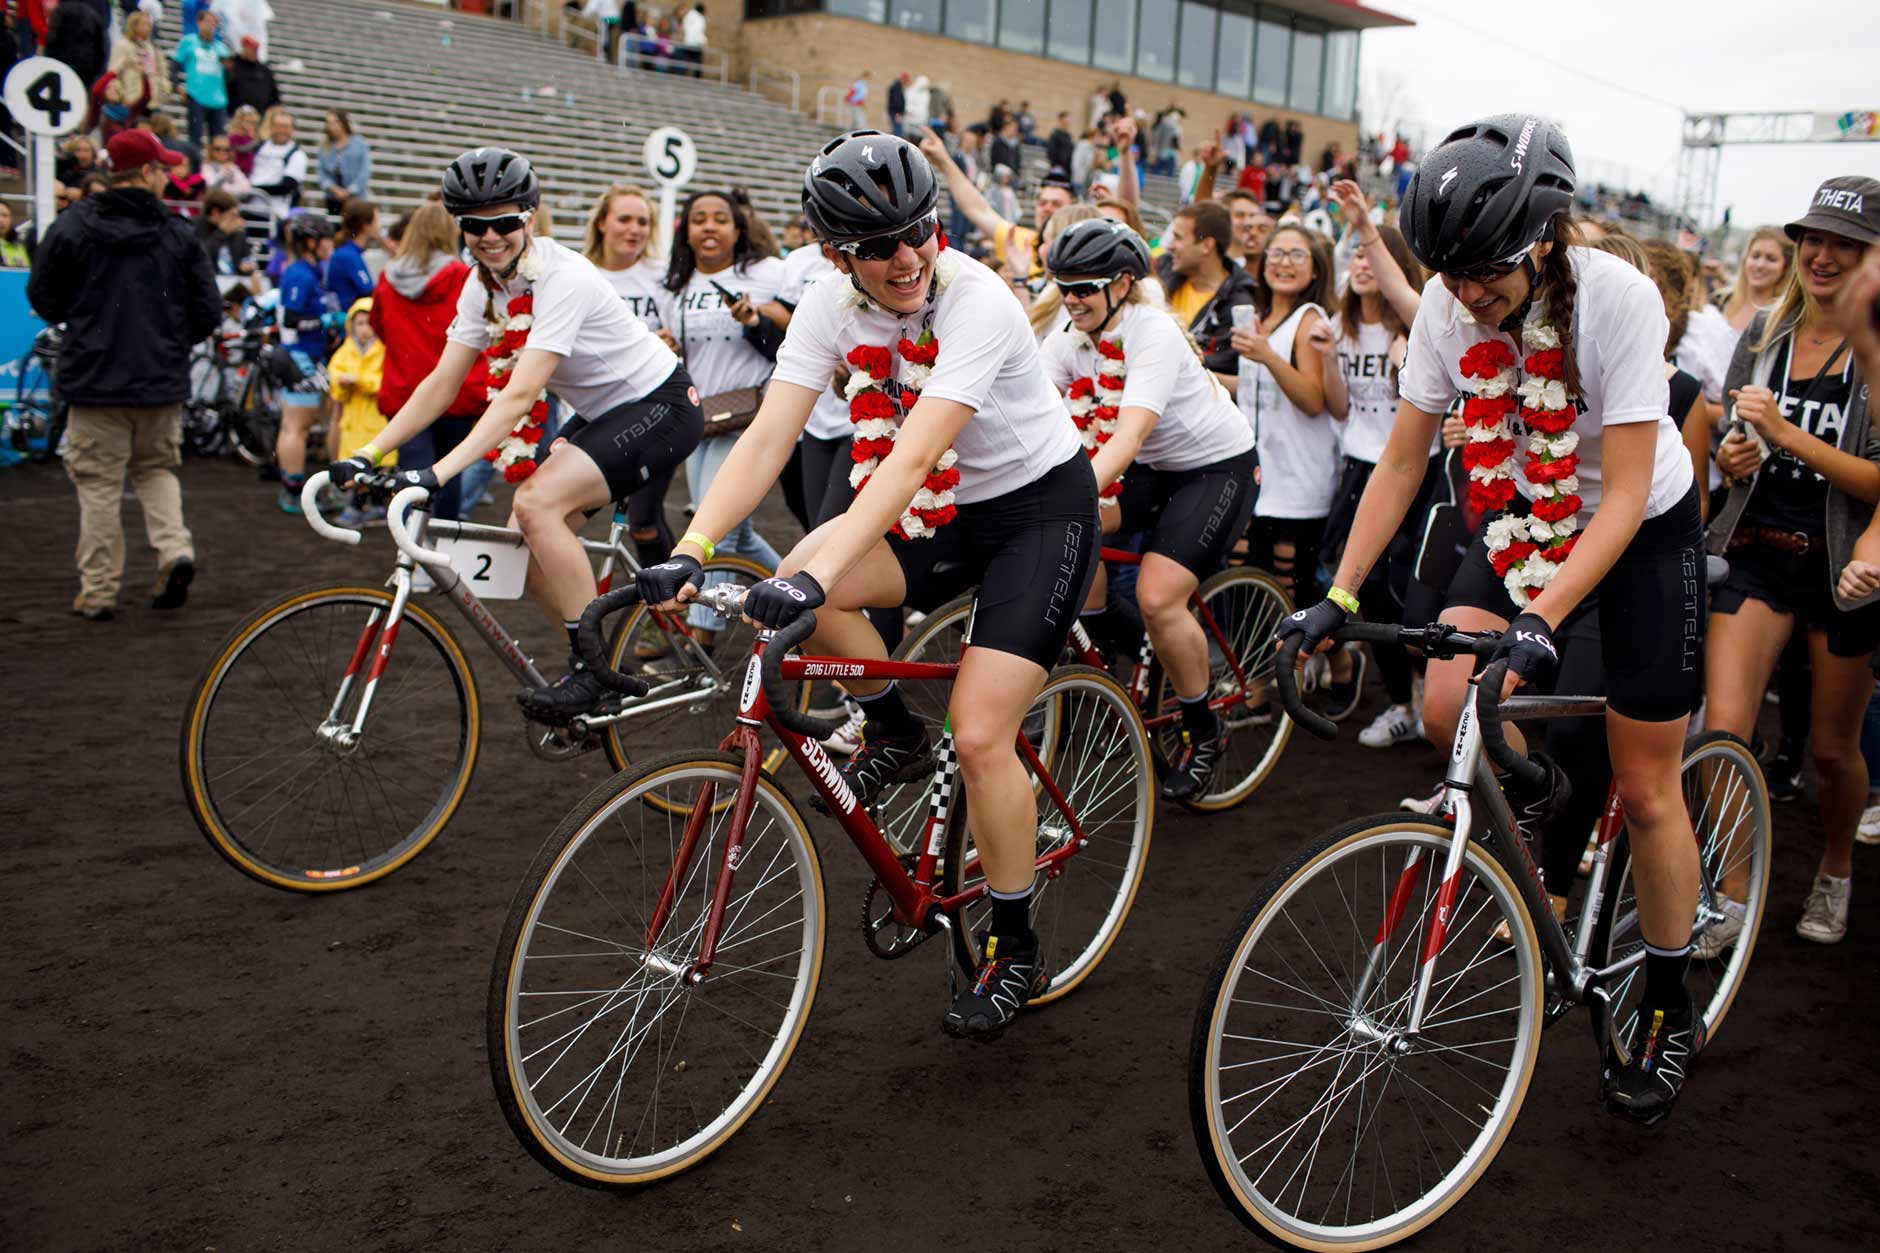 Kappa Alpha Theta riders take a victory lap around the track with their sorority sisters after the team's victory in the Women's Little 500 at Bill Armstrong Stadium on Friday, April 21, 2017. (James Brosher/IU Communications)